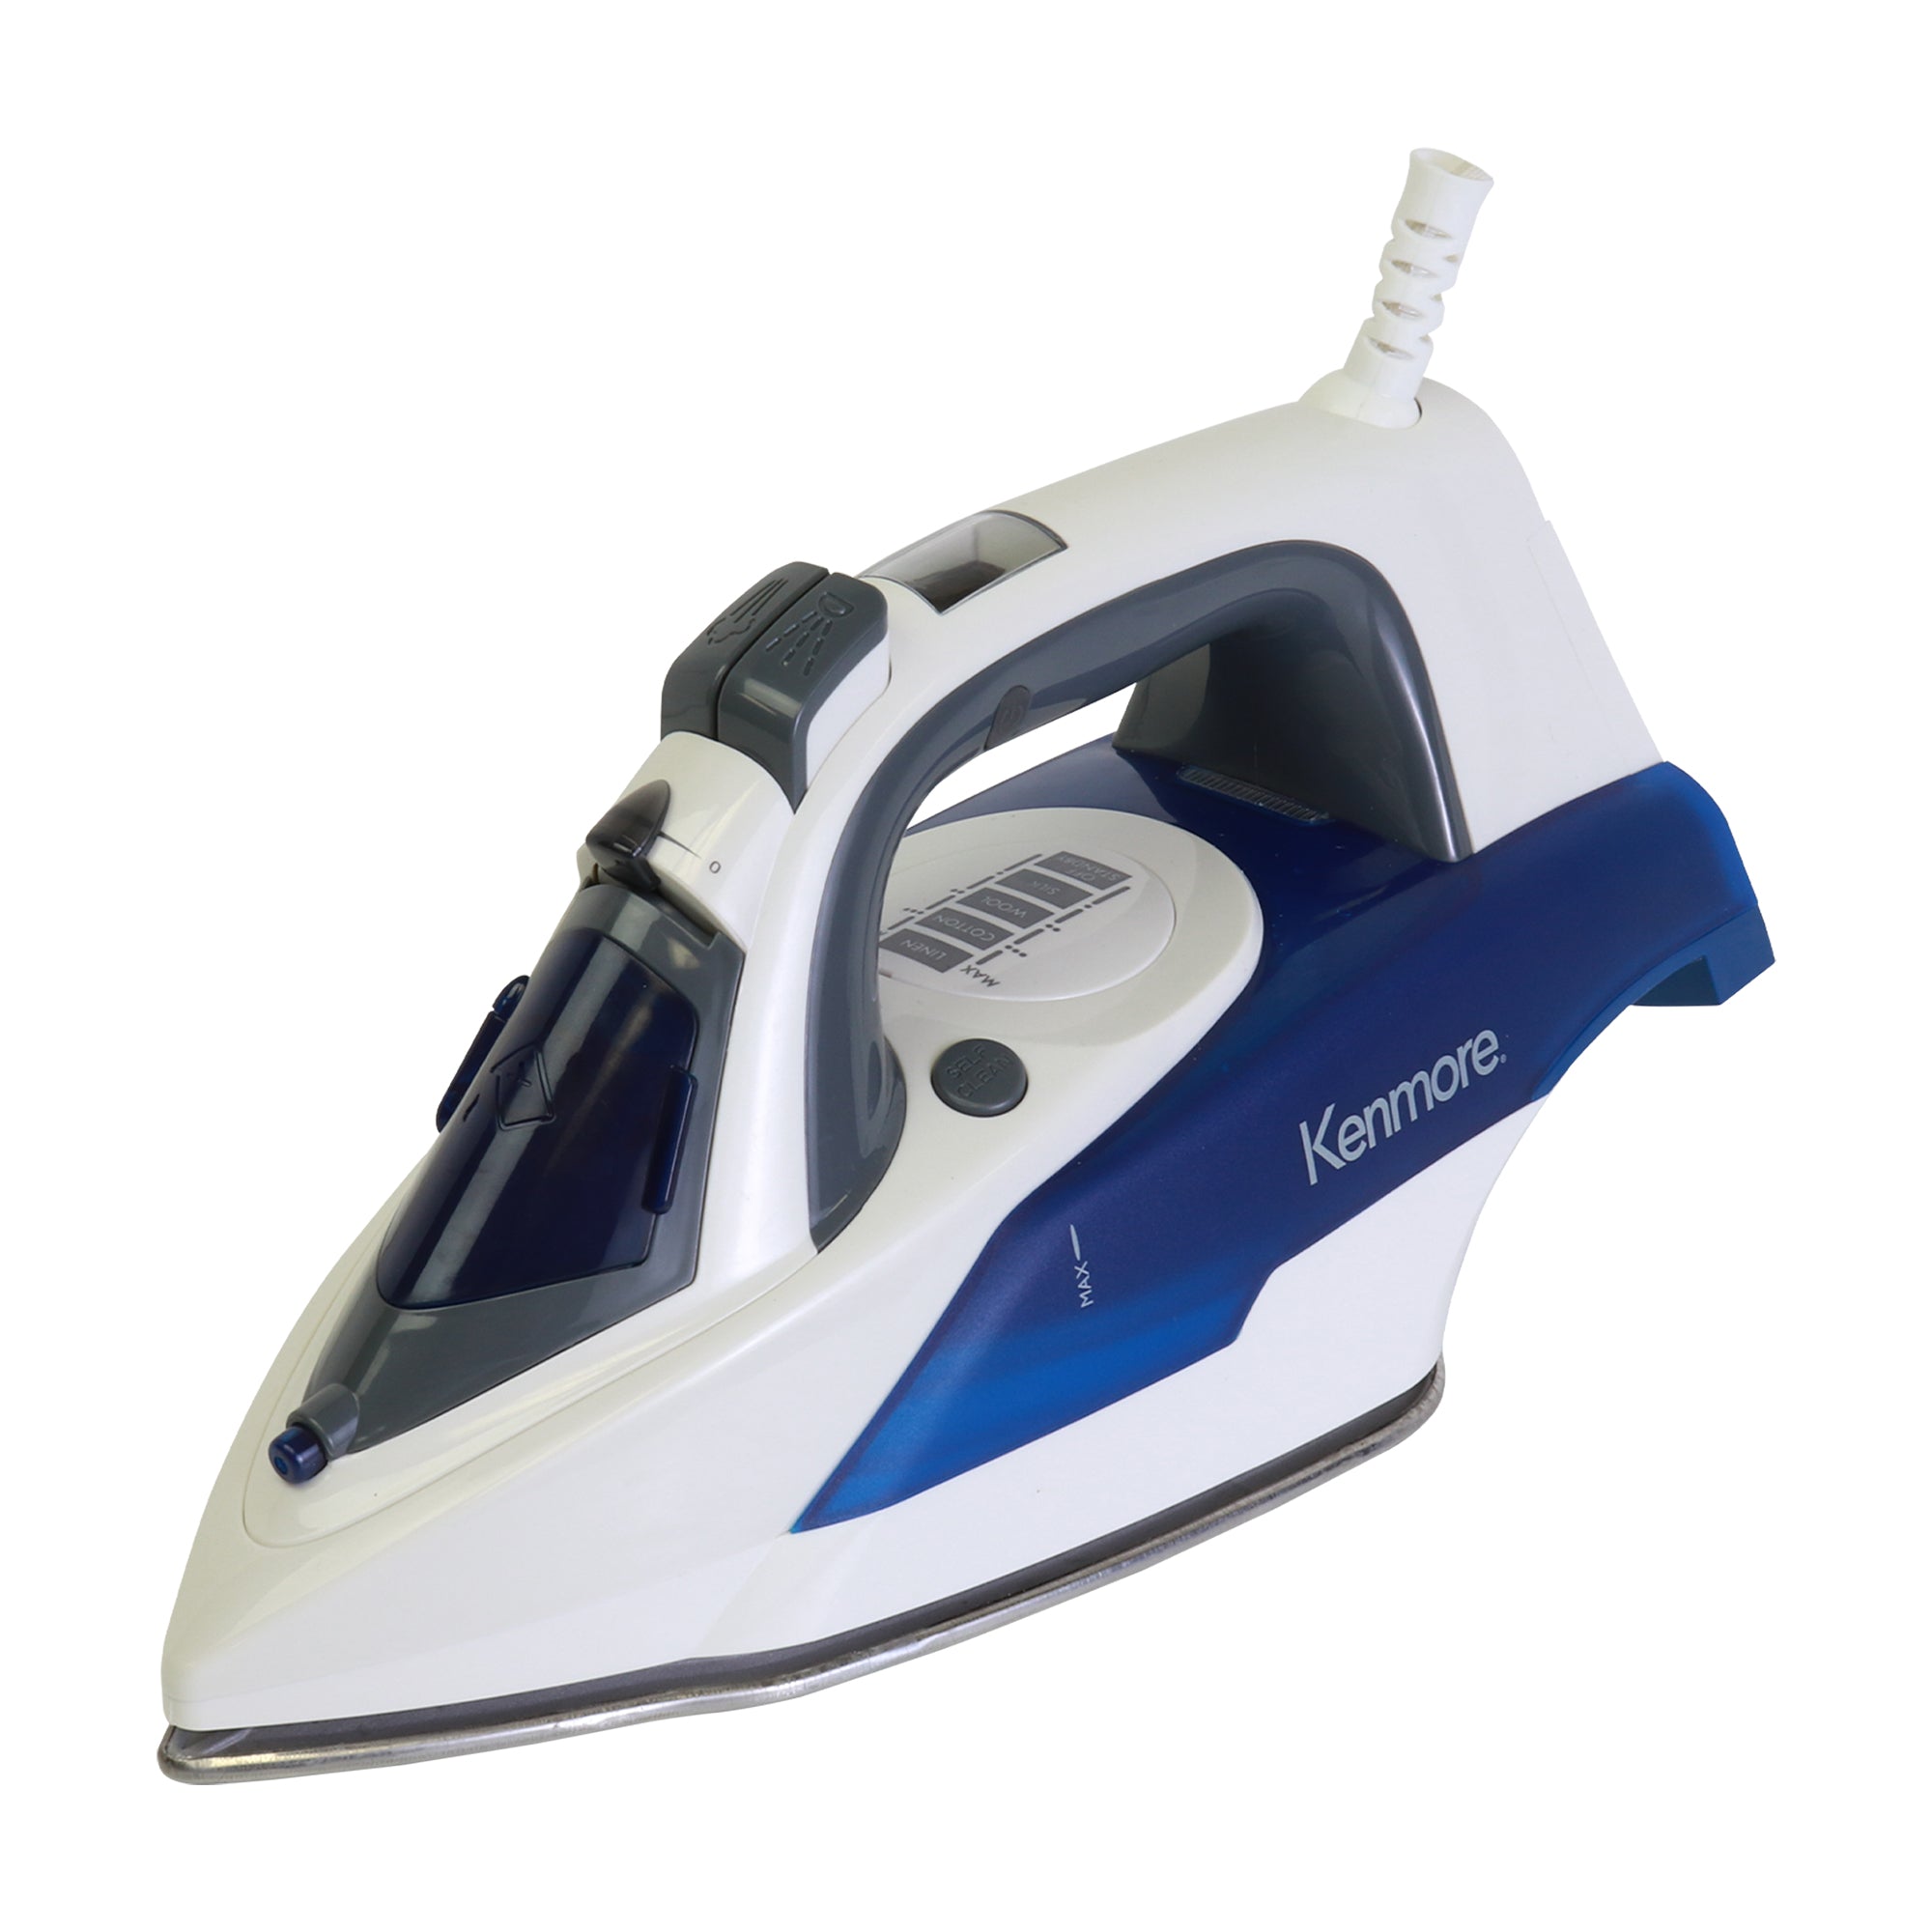 Kenmore digital steam iron with 9 fabric presets on a white background